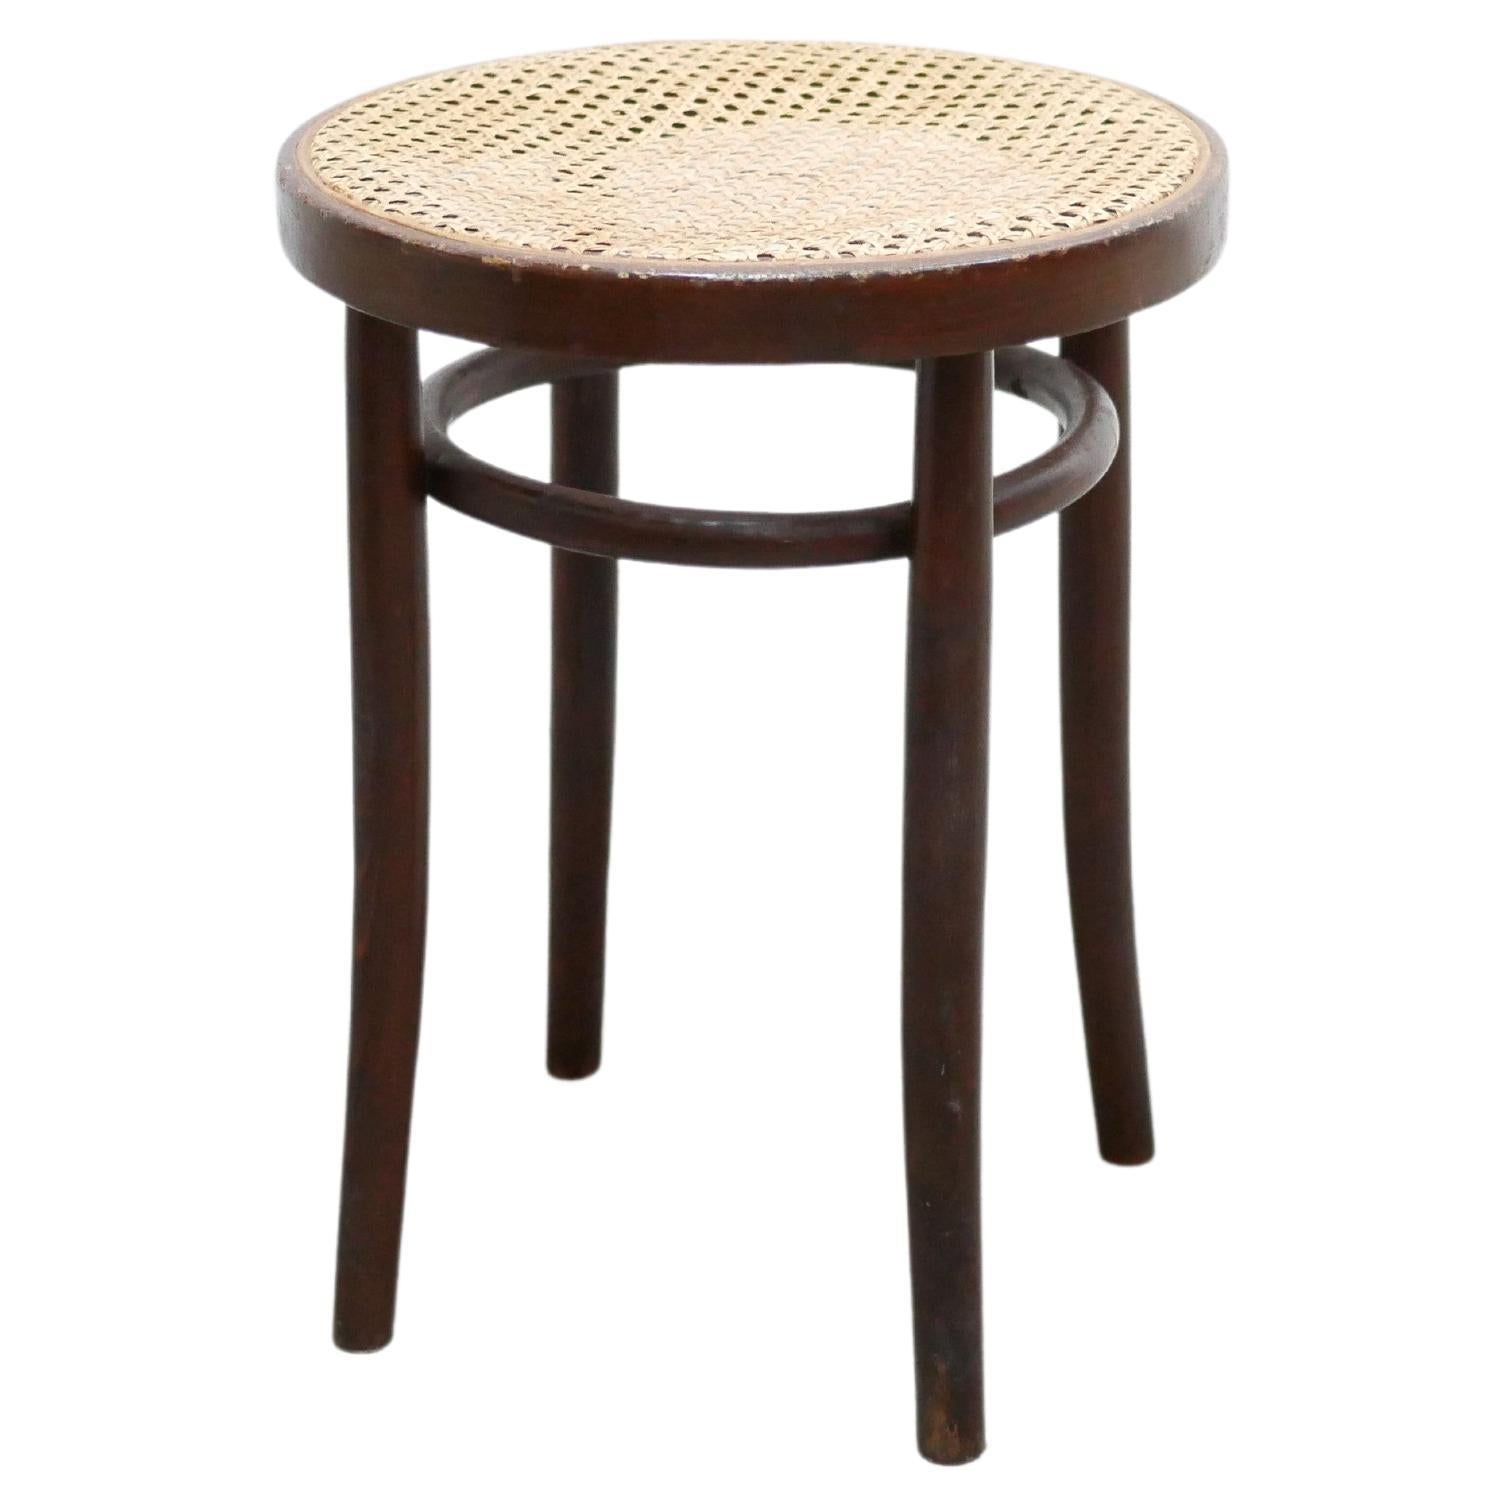 Vintage Wooden Caned Stool